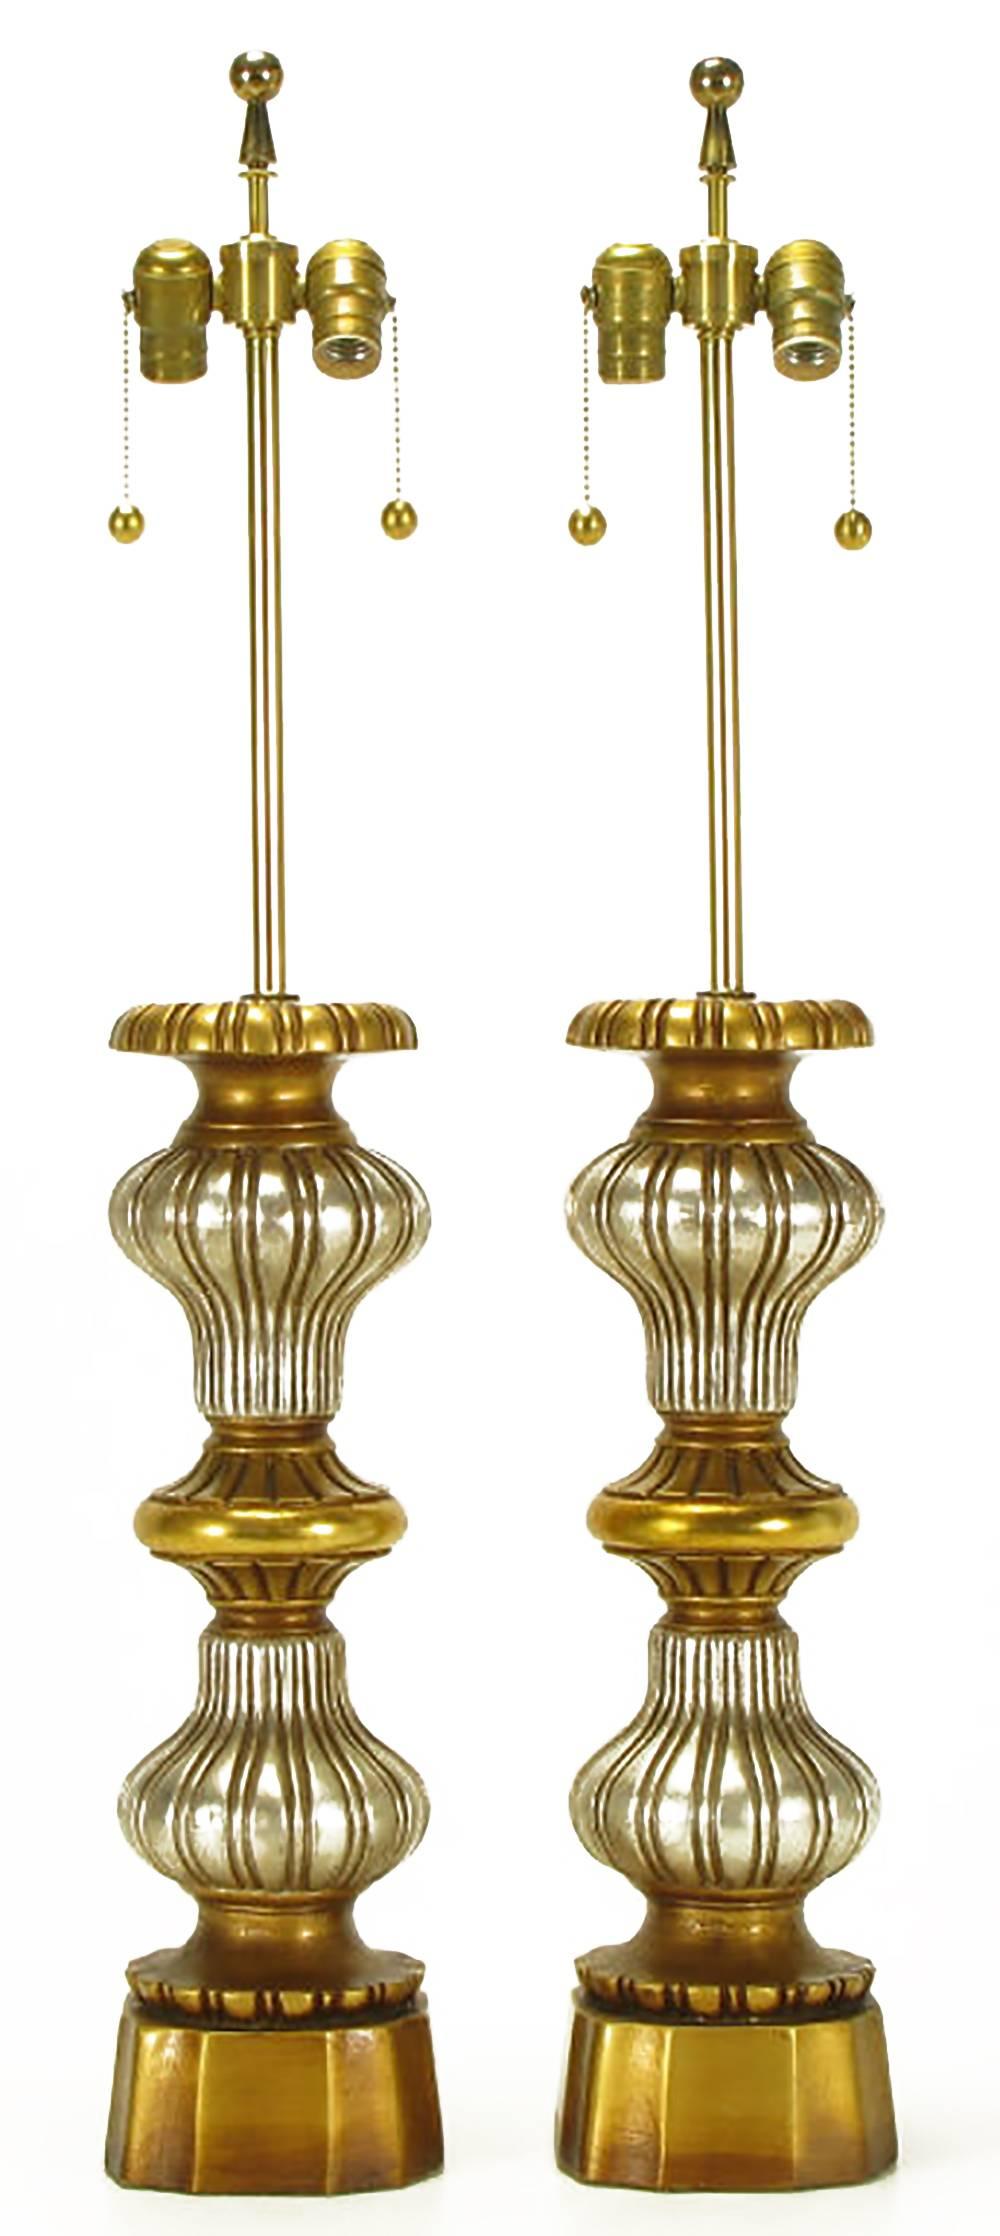 Heavy cast plaster of Paris Regency style table lamps in alternating gold and silver leaf gourd-form segments. Sold sans shades.